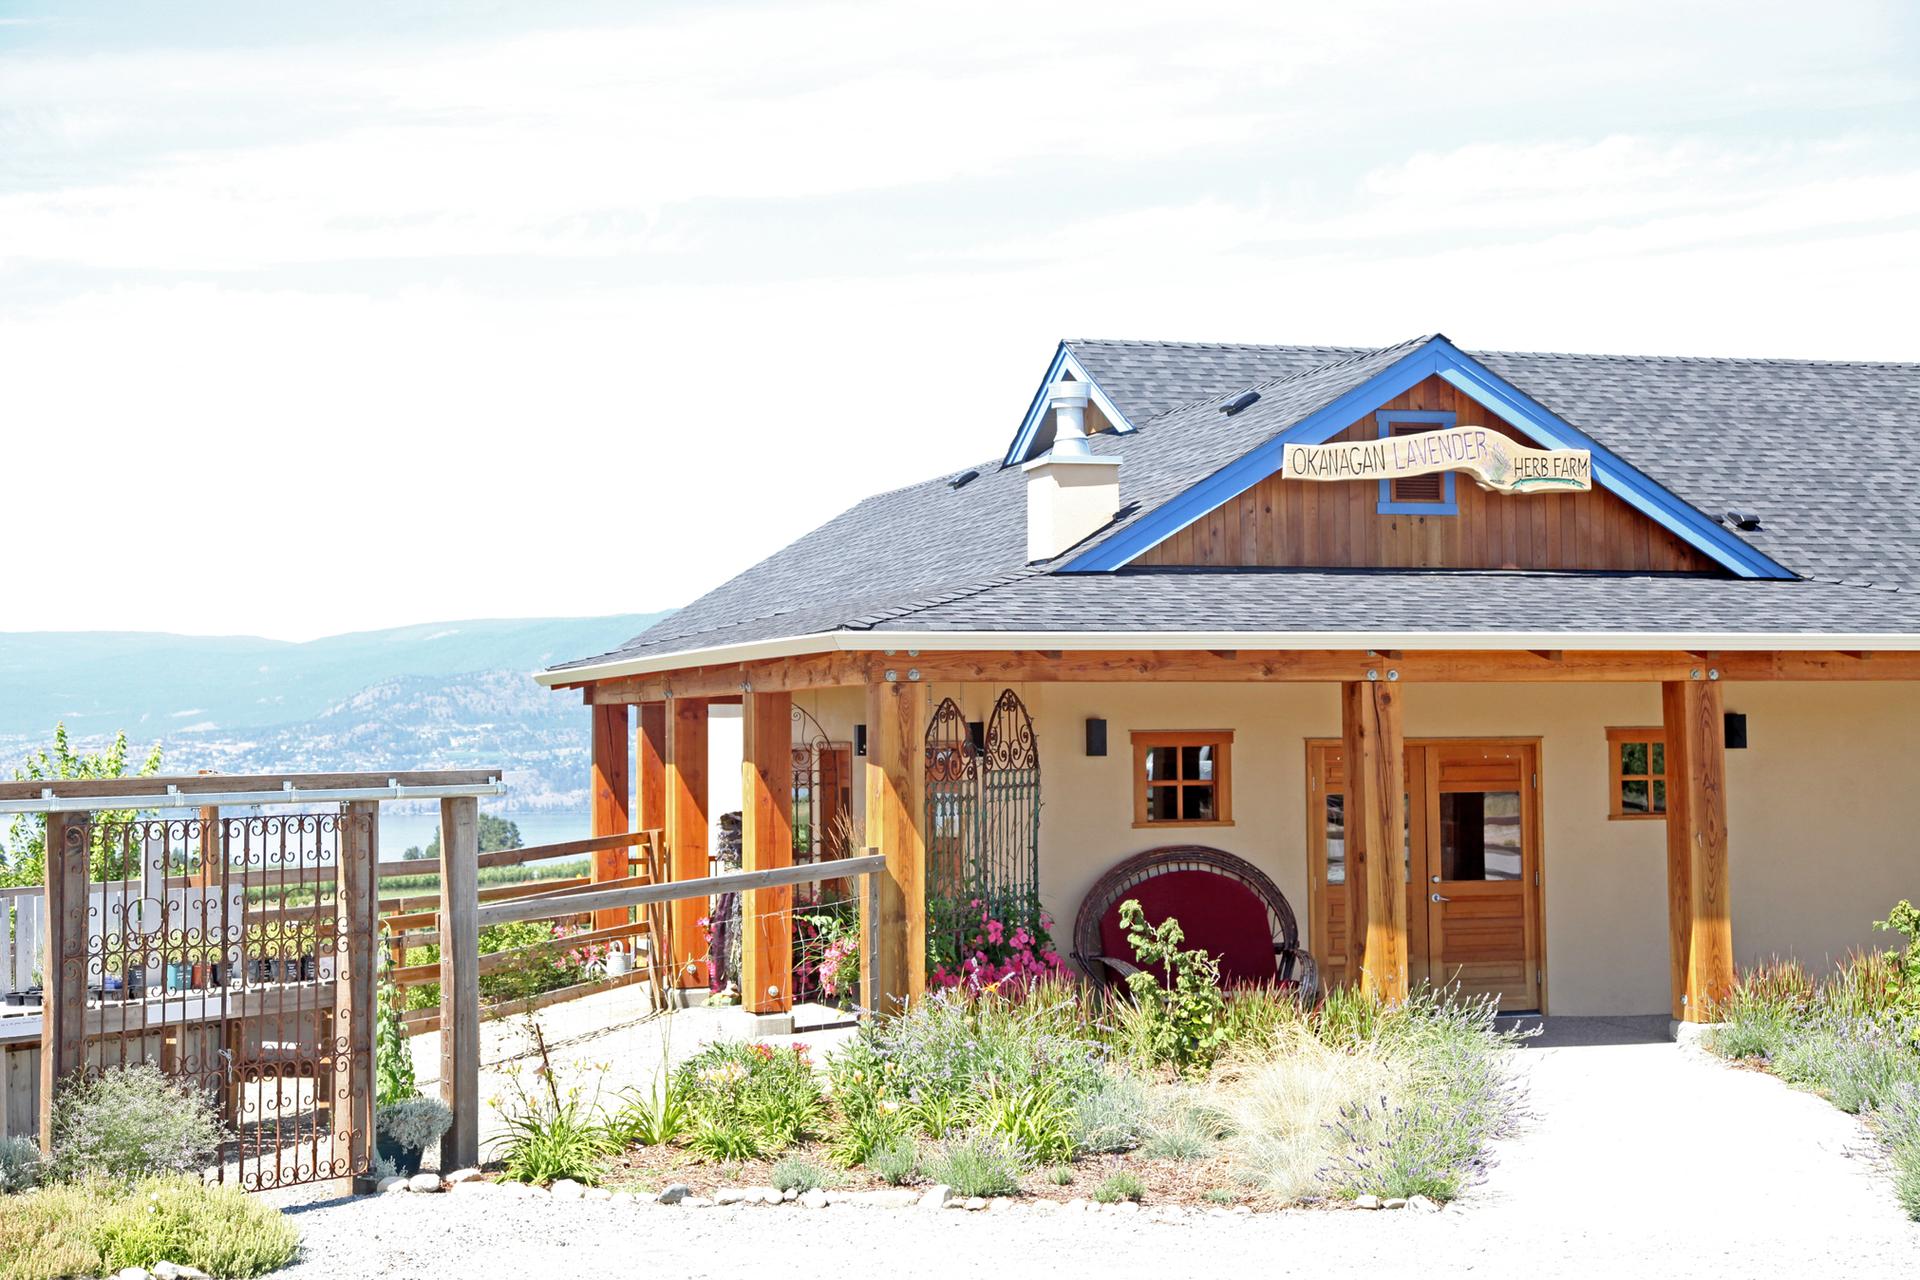 Private tour of farms surrounding Kelowna: a fragrant herb farm, a working beehive, an apple cidery, and a dairy farm with unrivalled lake views